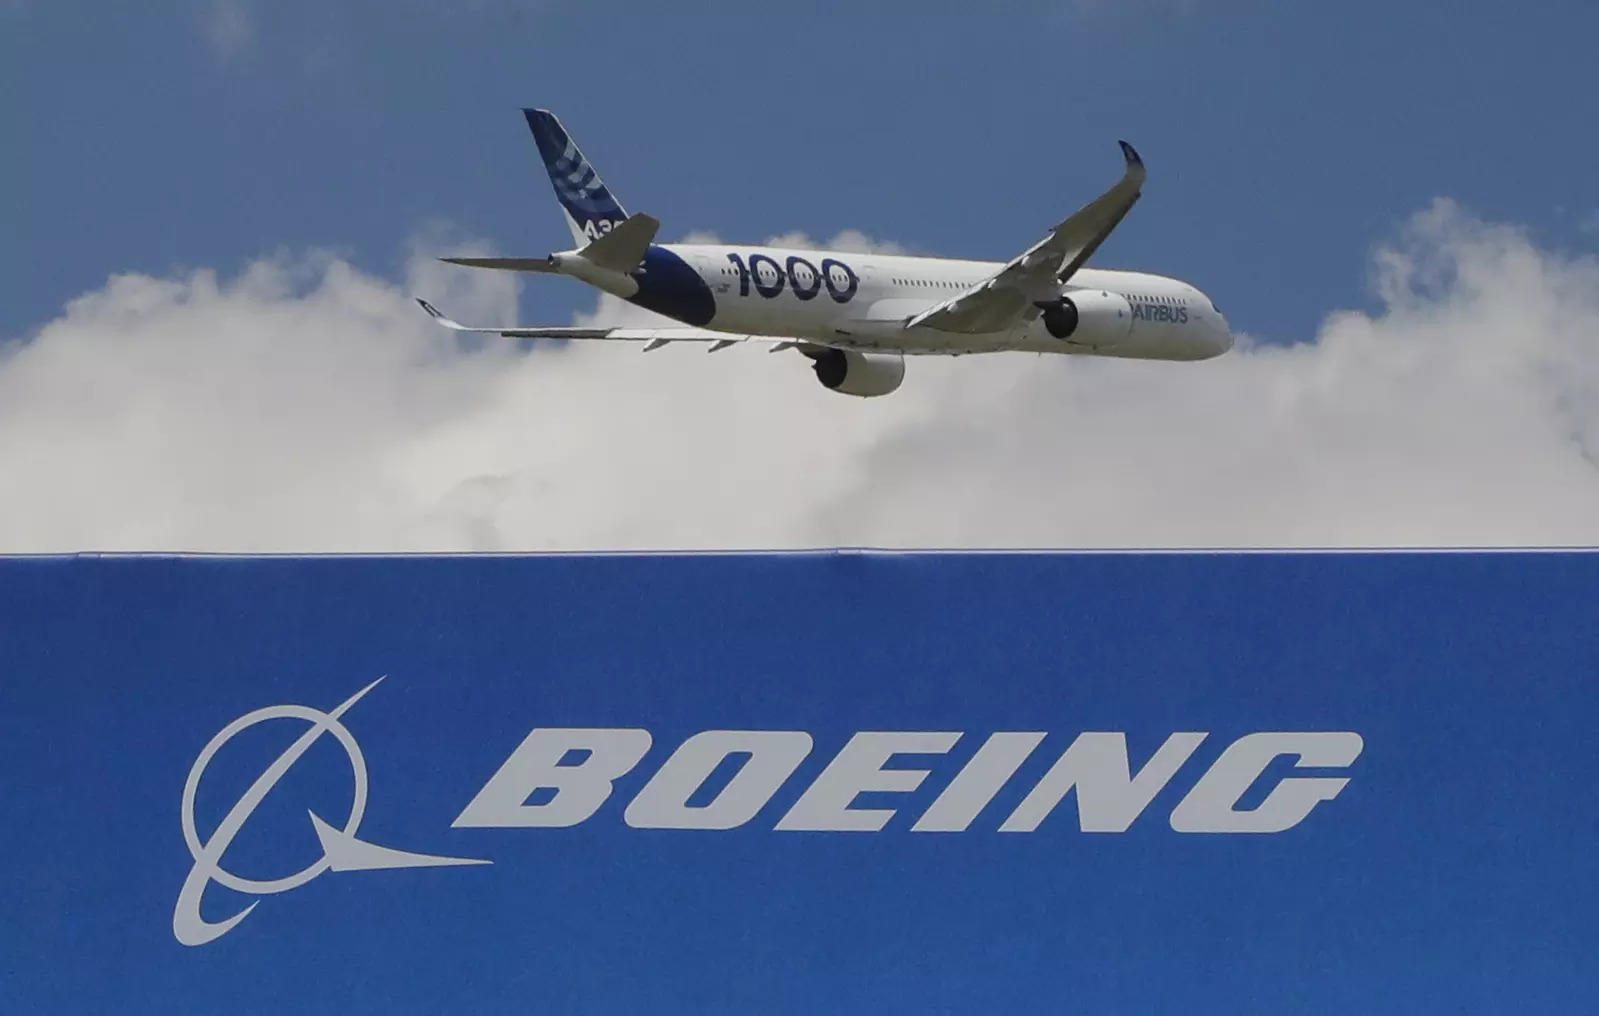 An Airbus A 350 - 1000 performs a demonstration flight at Paris Air Show in Le Bourget, France. (Photo: AP)